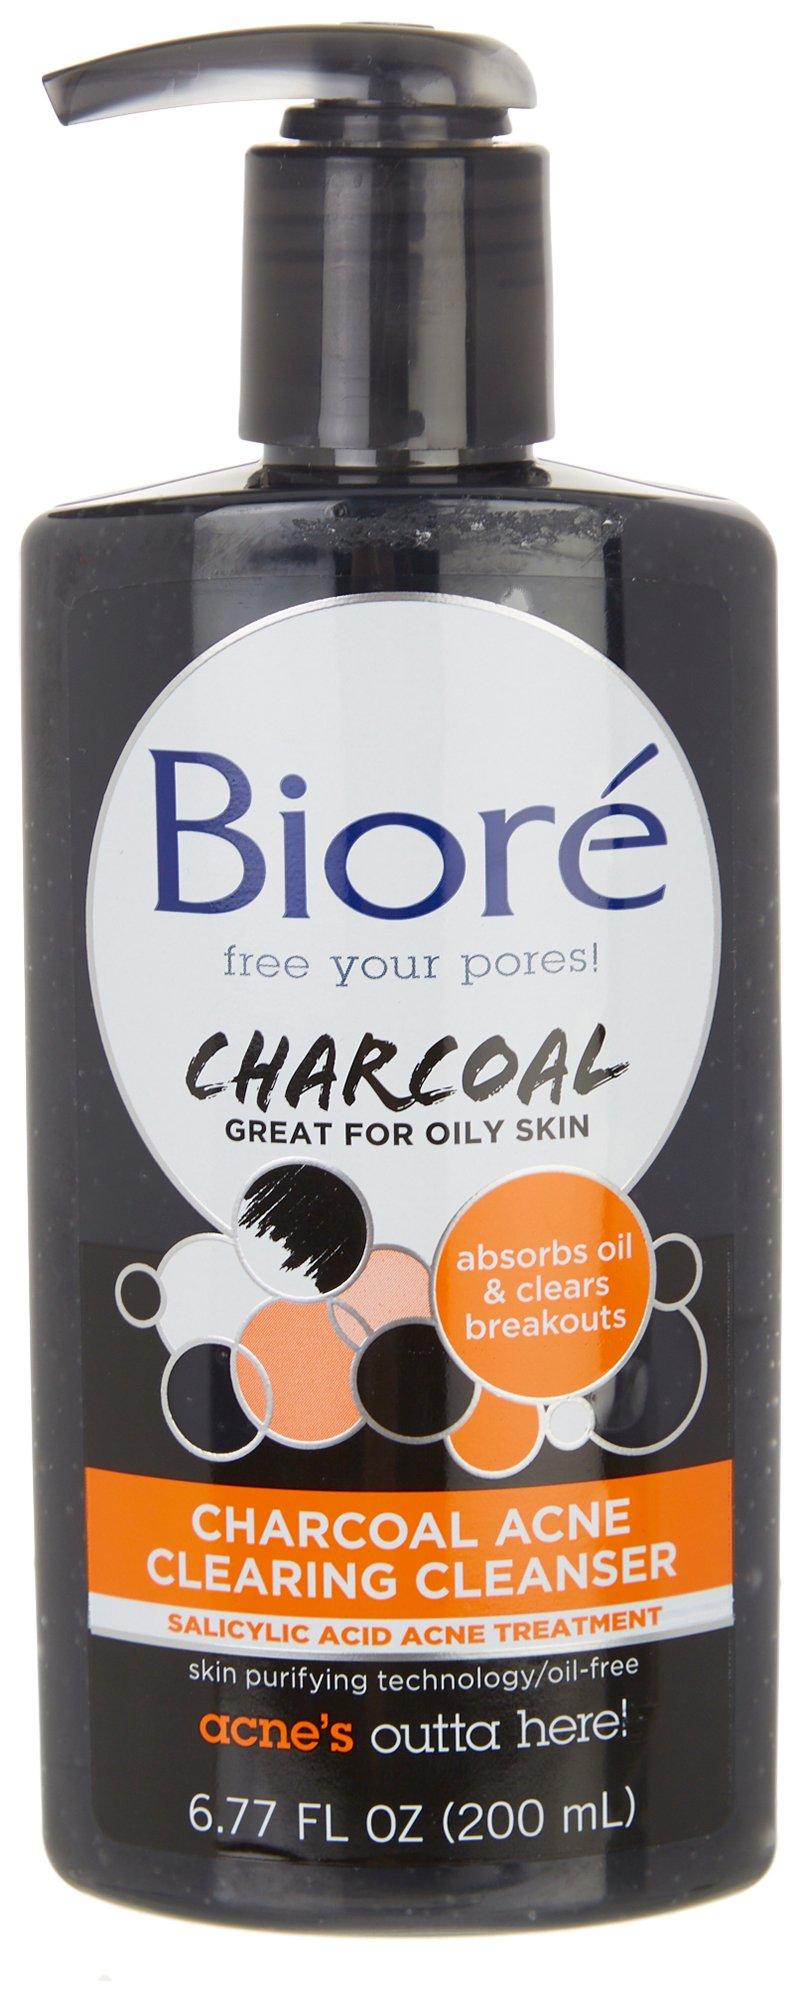 Charcoal Acne Clearing Cleanser For Oily Skin